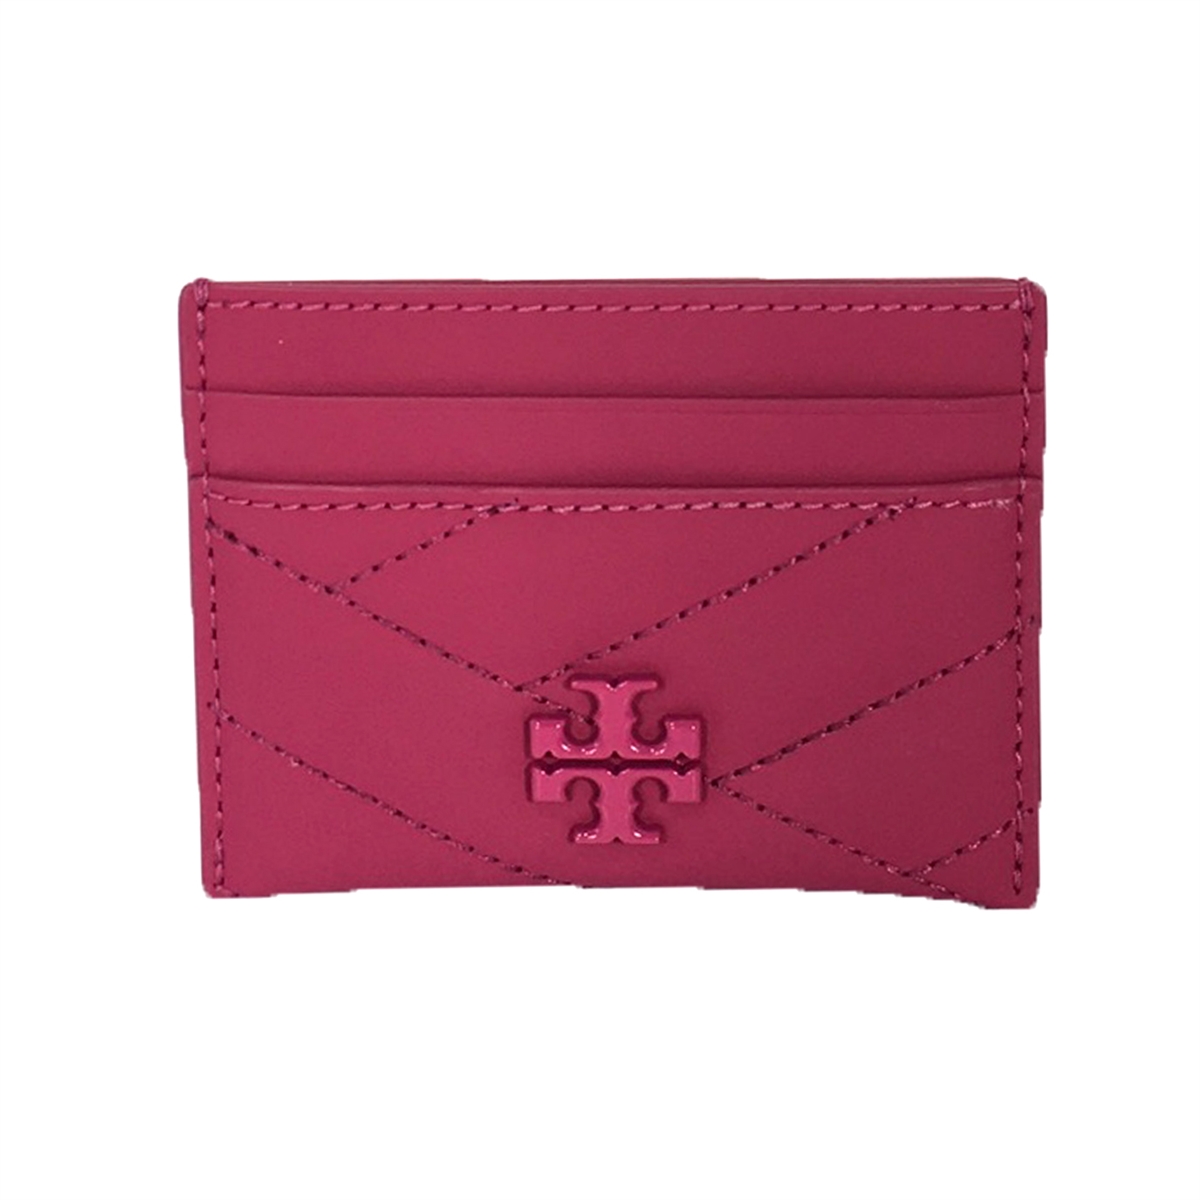 Tory Burch Kira Chevron-Quilted Card Case